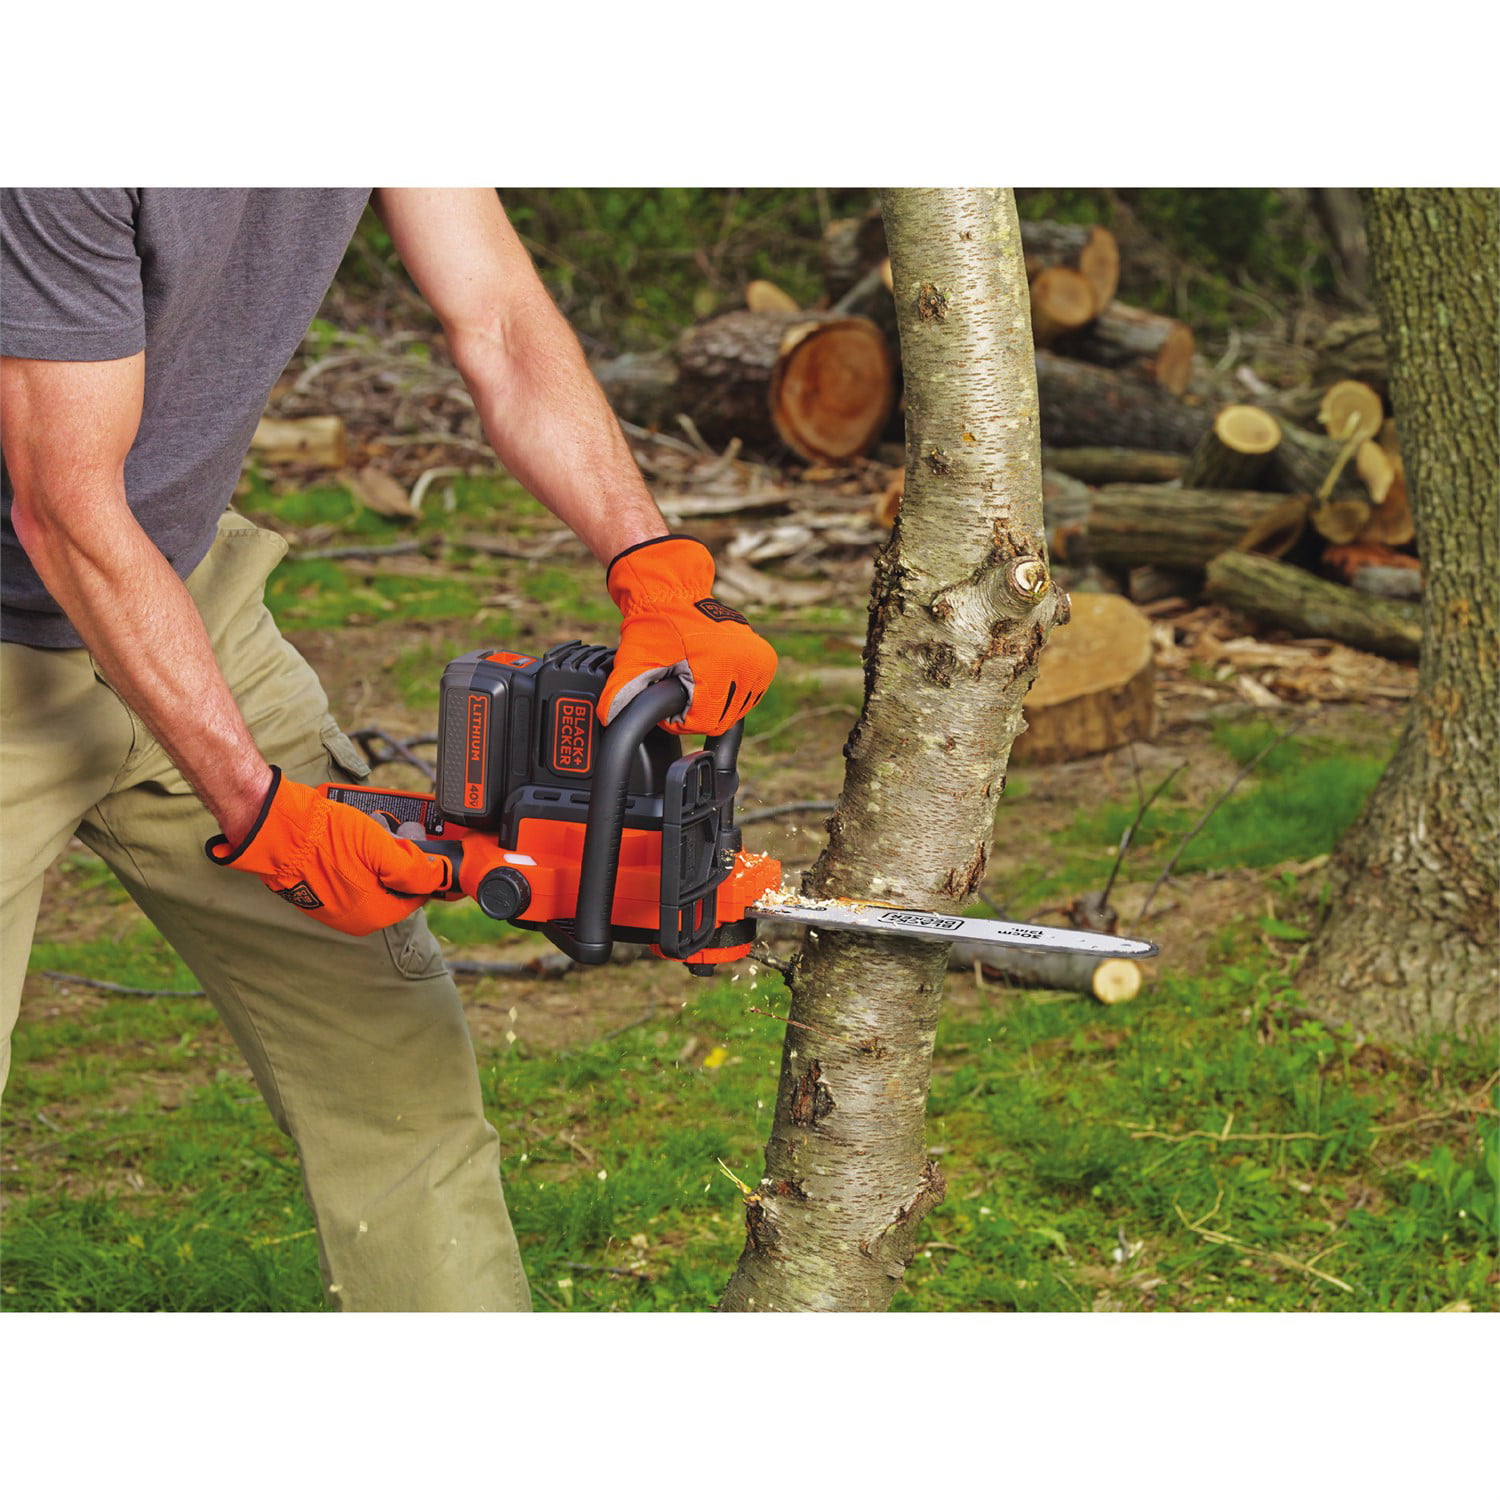 Black & Decker LCS1020 20V MAX* Lithium 10 Inch Chainsaw (Type 1) Parts and  Accessories at PartsWarehouse